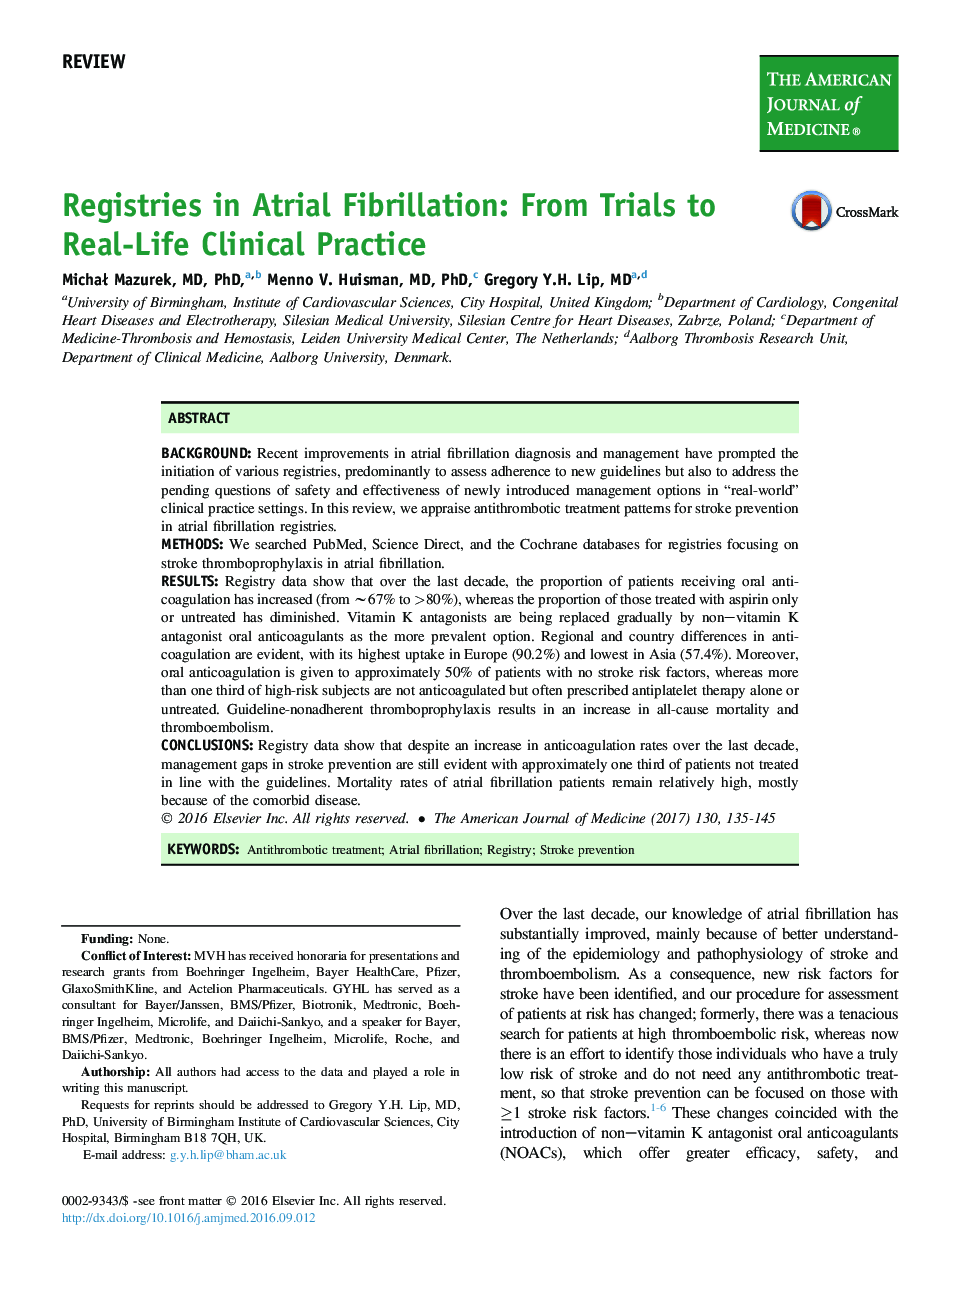 Registries in Atrial Fibrillation: From Trials to Real-Life Clinical Practice